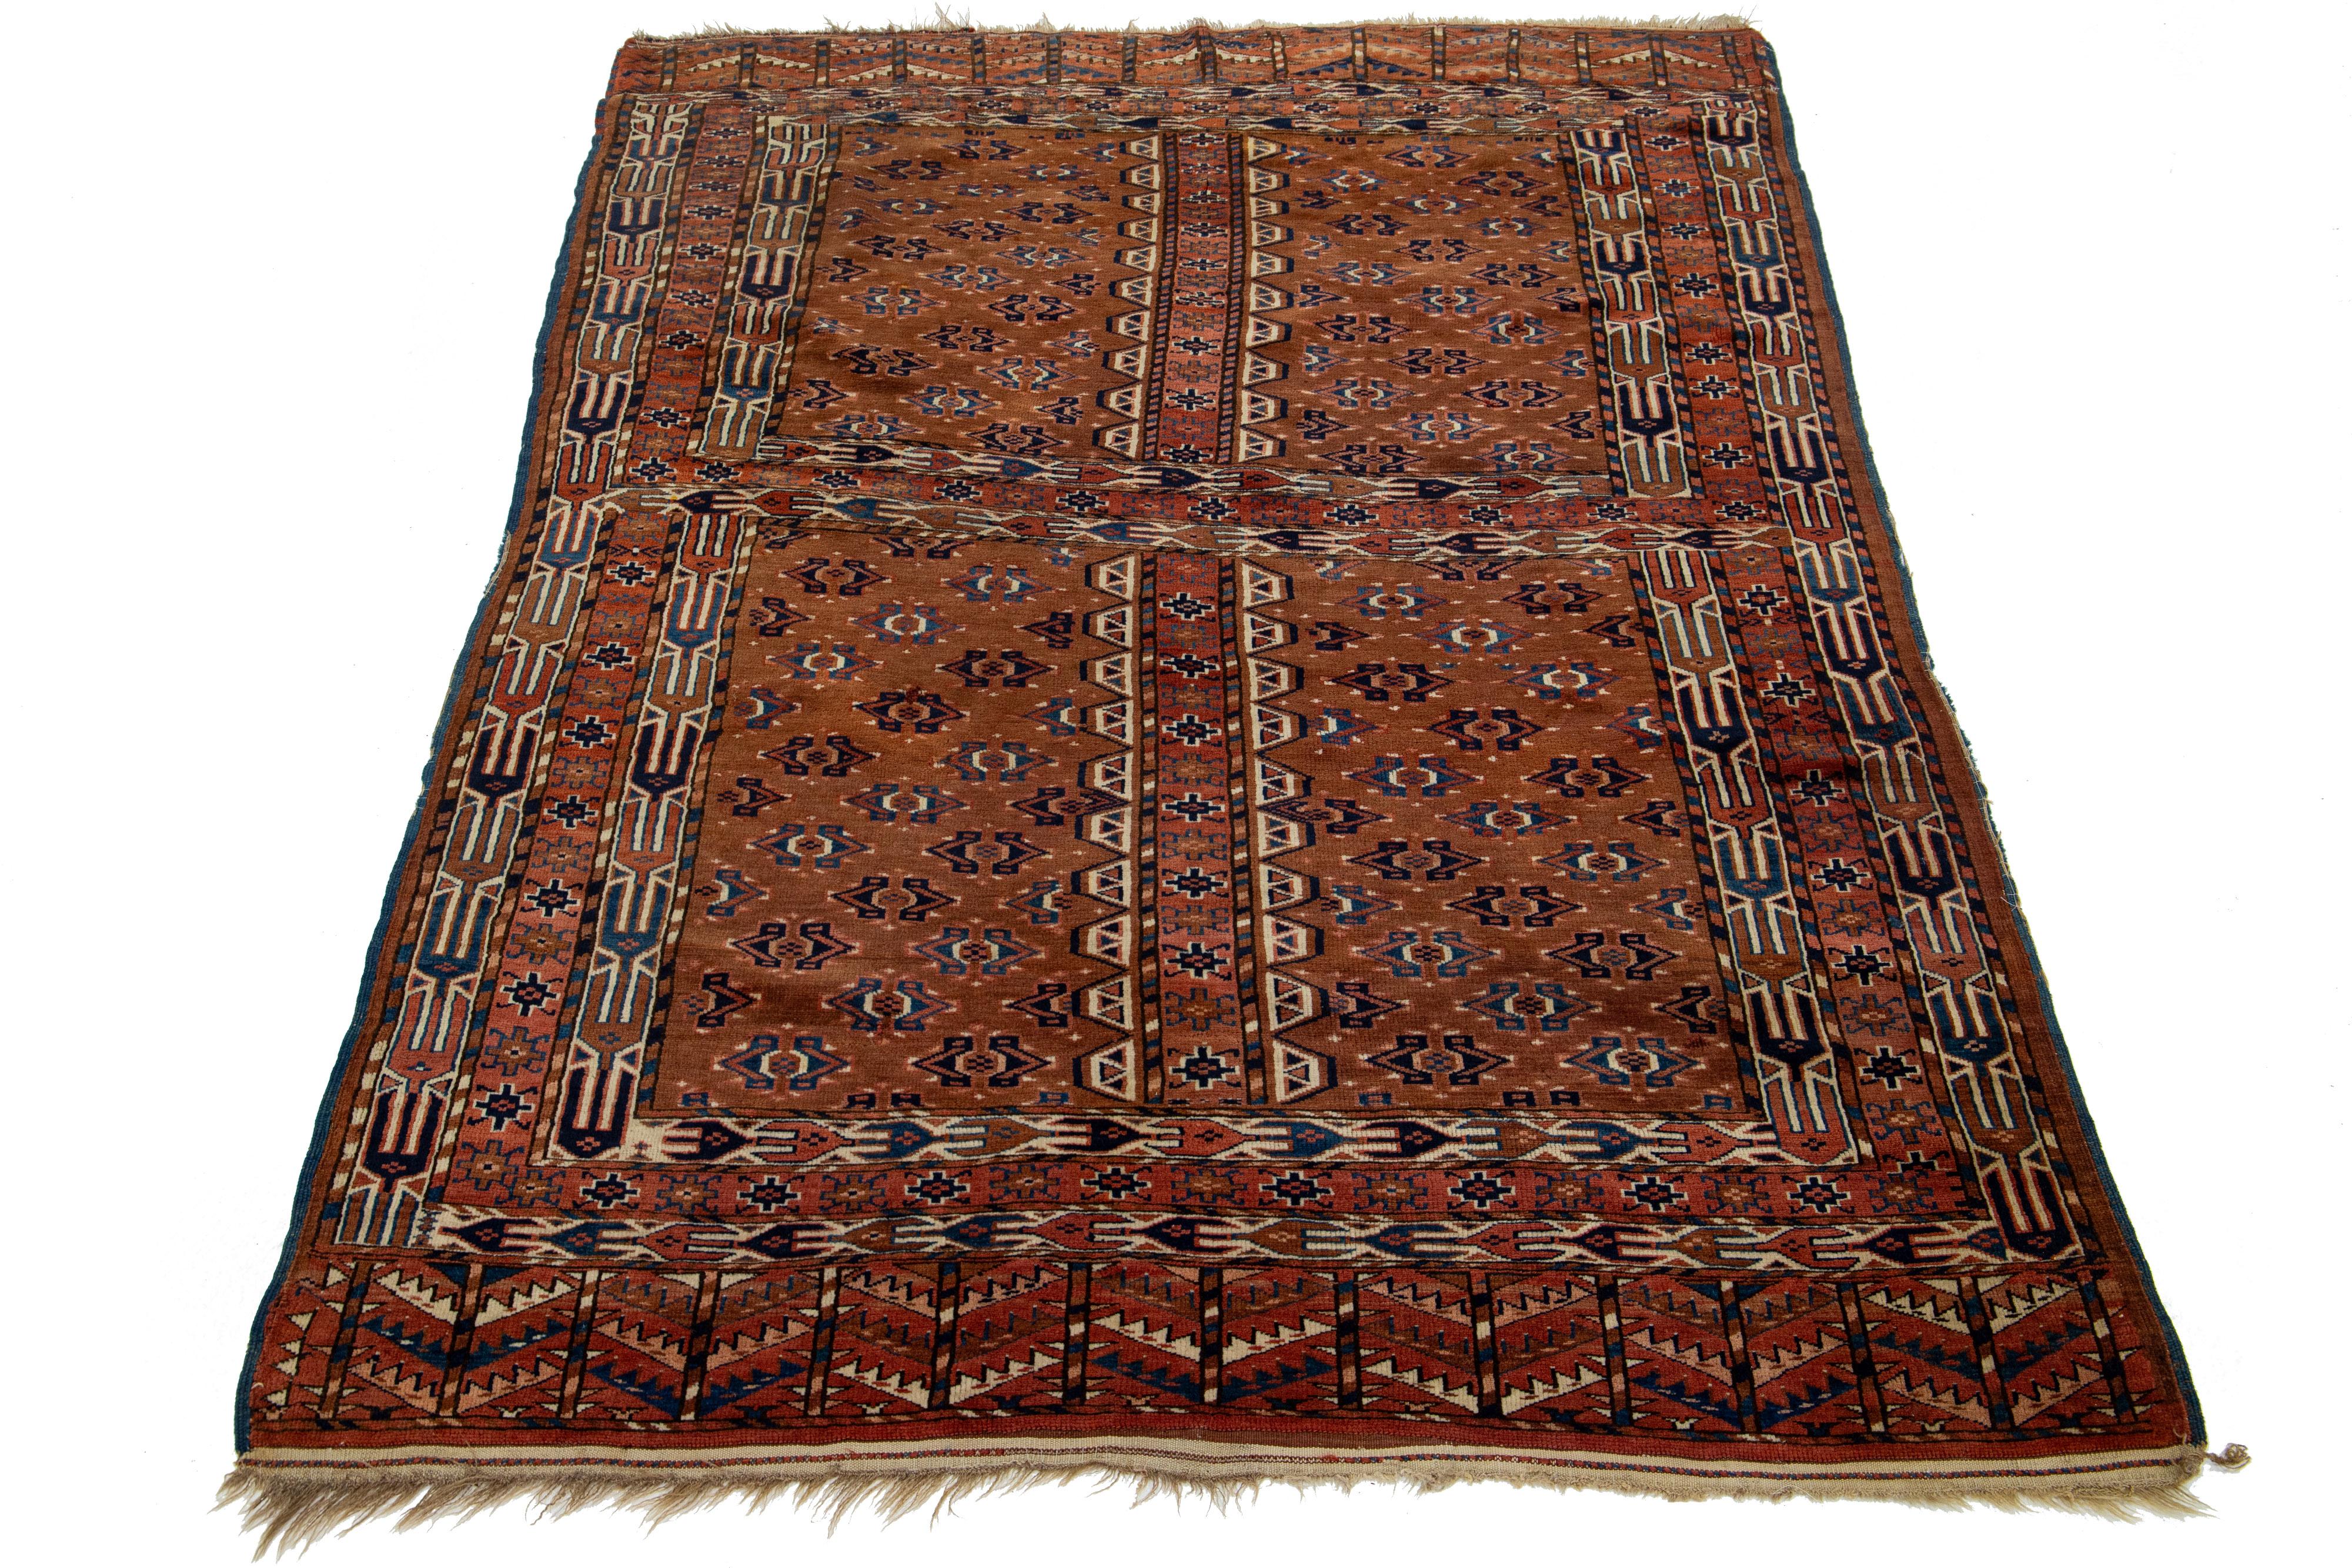 This antique Yamoud wool rug, with its medium brown color, stands out due to its impressive geometric design in shades of navy blue, bright ochre, and terracotta.

This rug measures 4'4